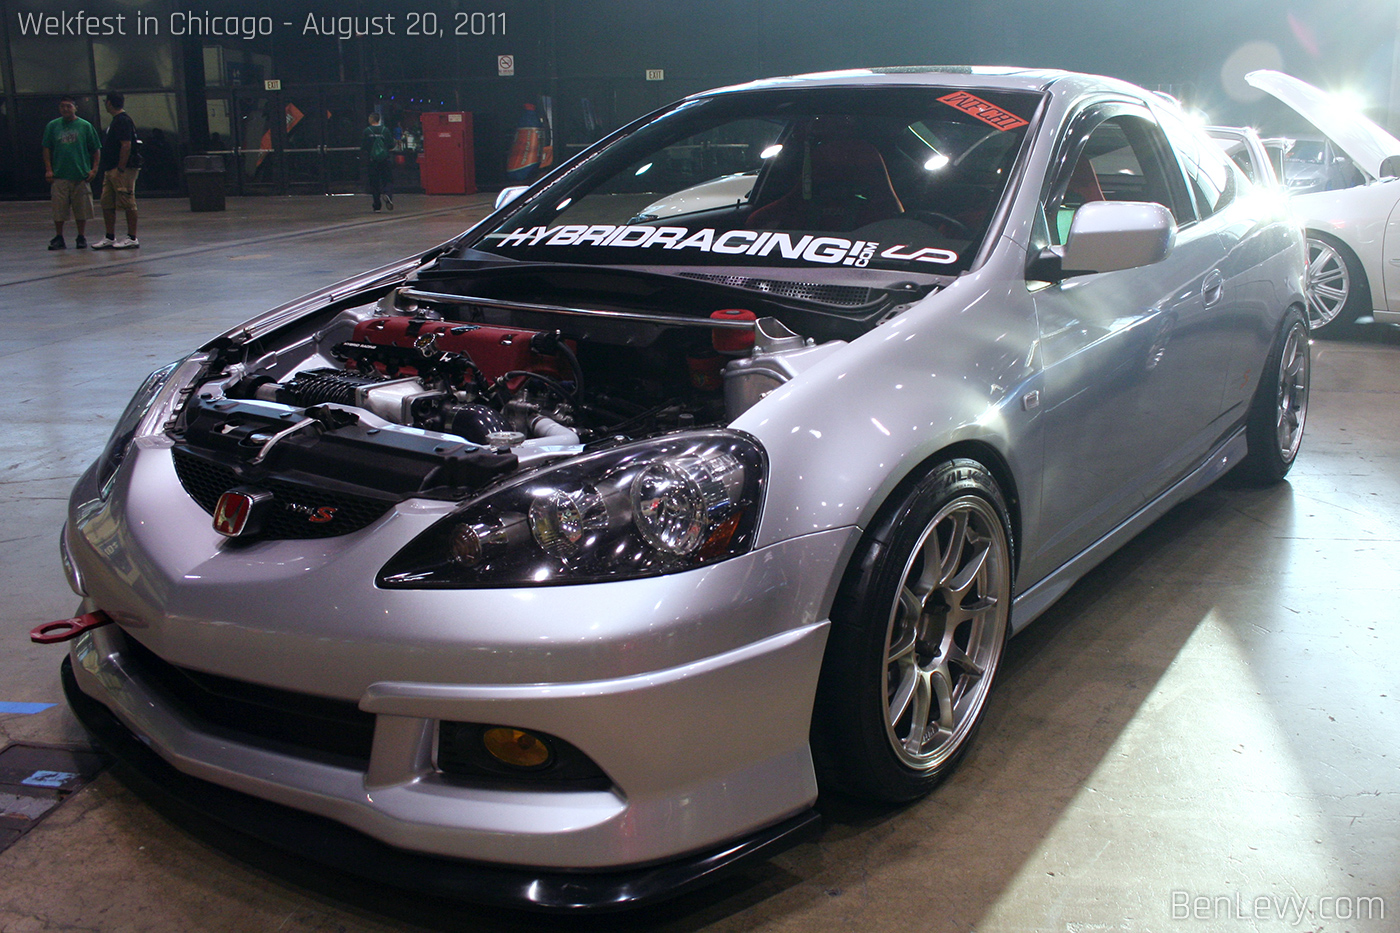 Supercharged Acura RSX Type-S